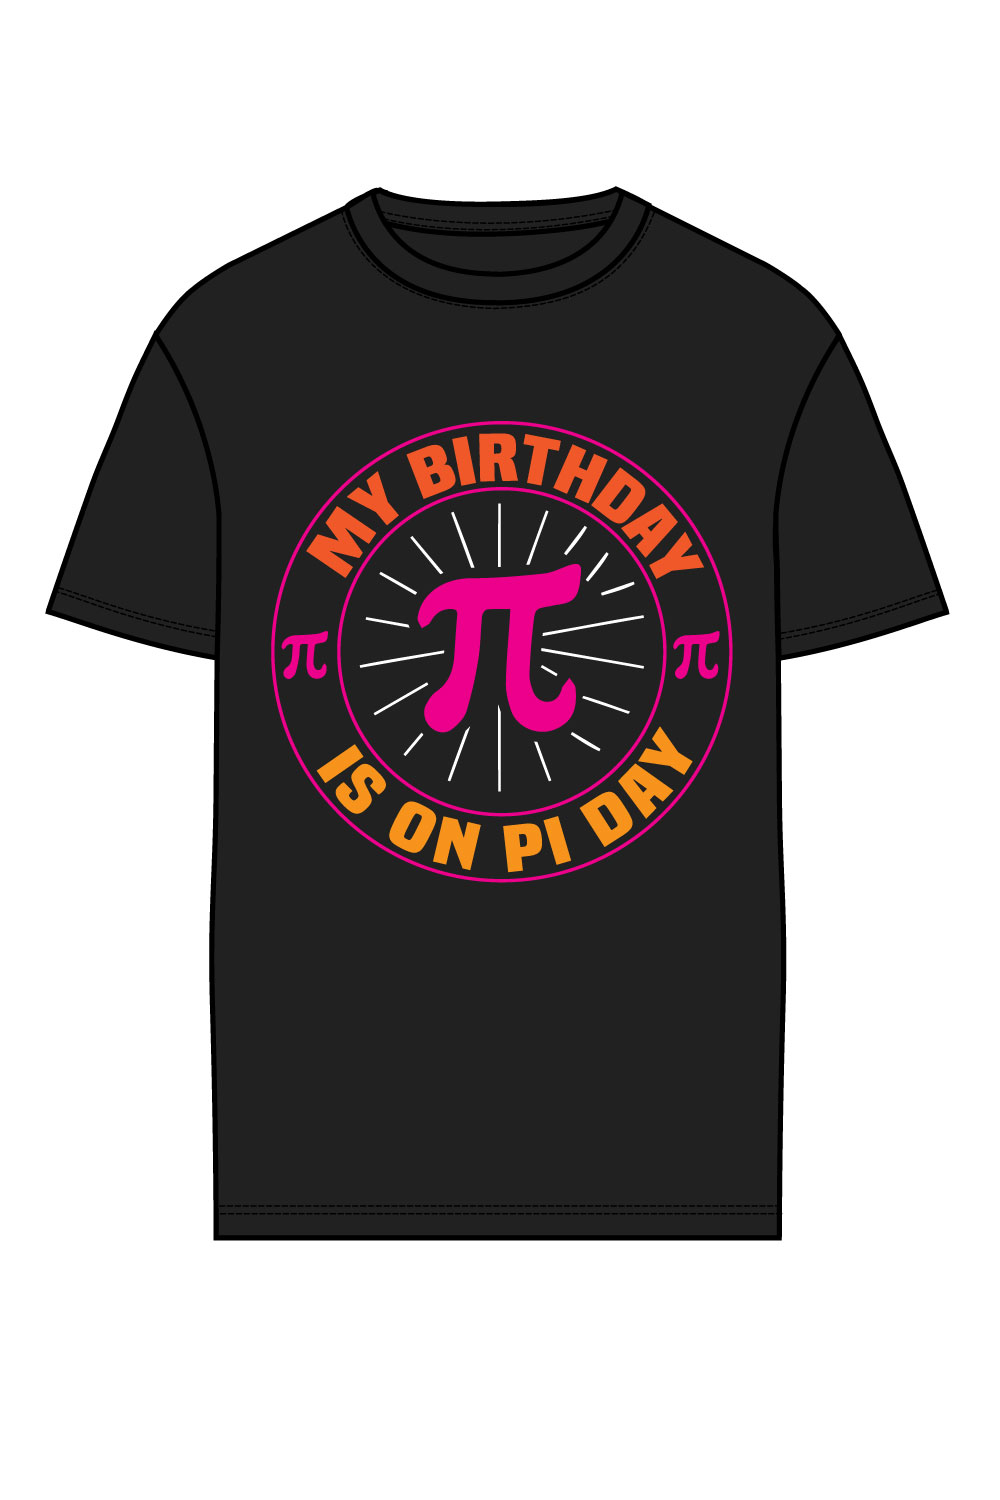 4 happy pi day t-shirt design pinterest preview image.